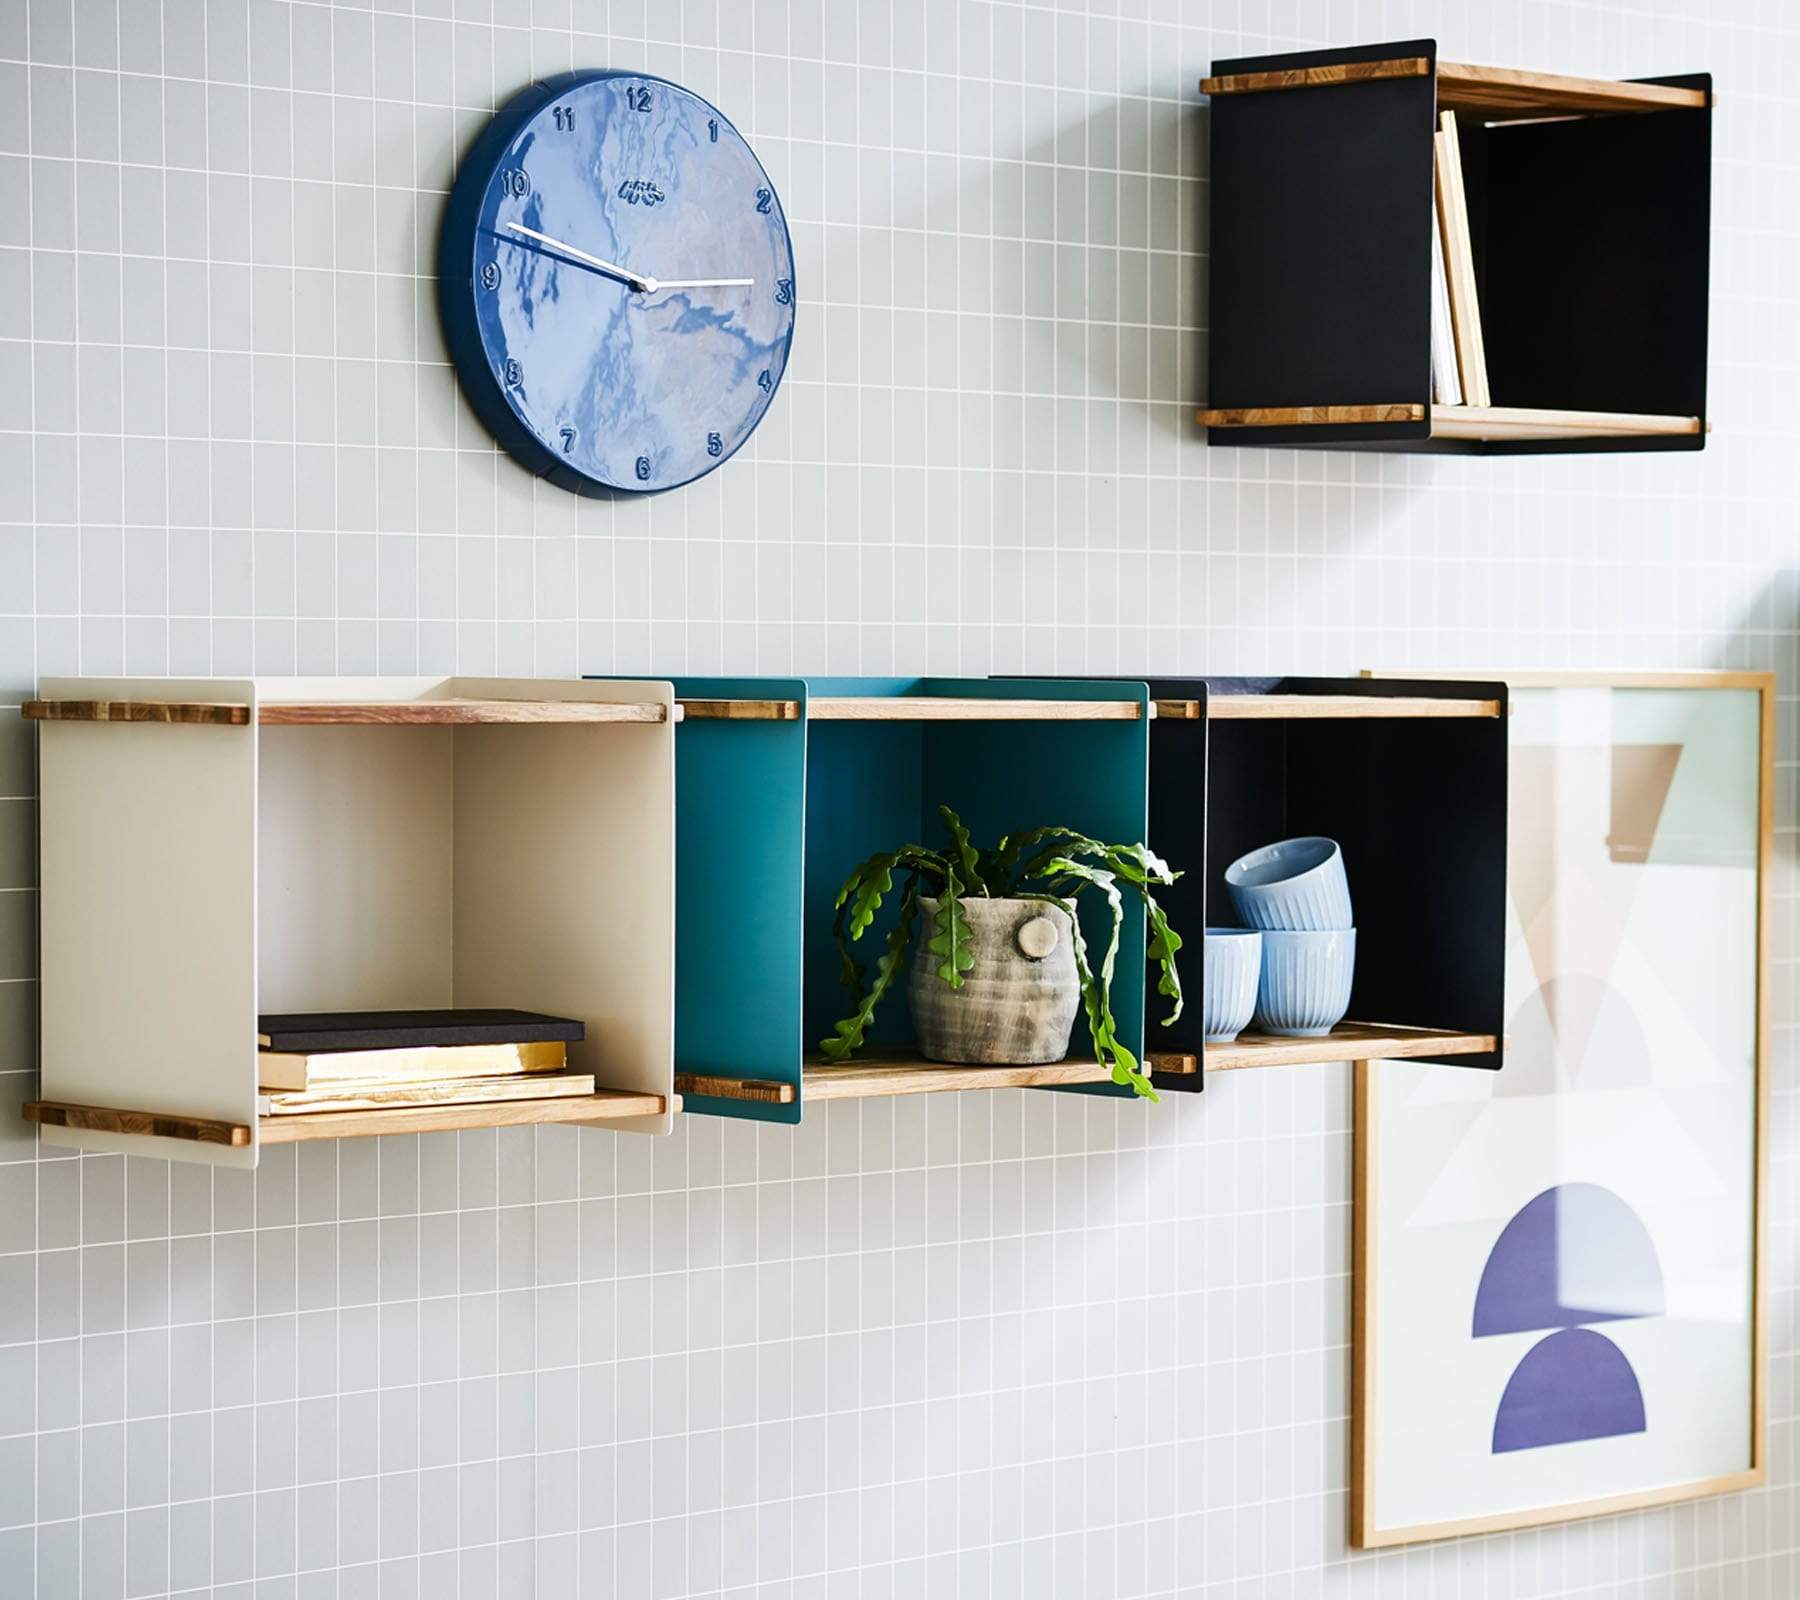 Boxhill's blue / black / white Wall-mounted Teak Wood Square Shelves mounted on grey wall tiles with random things on it and a wall clock